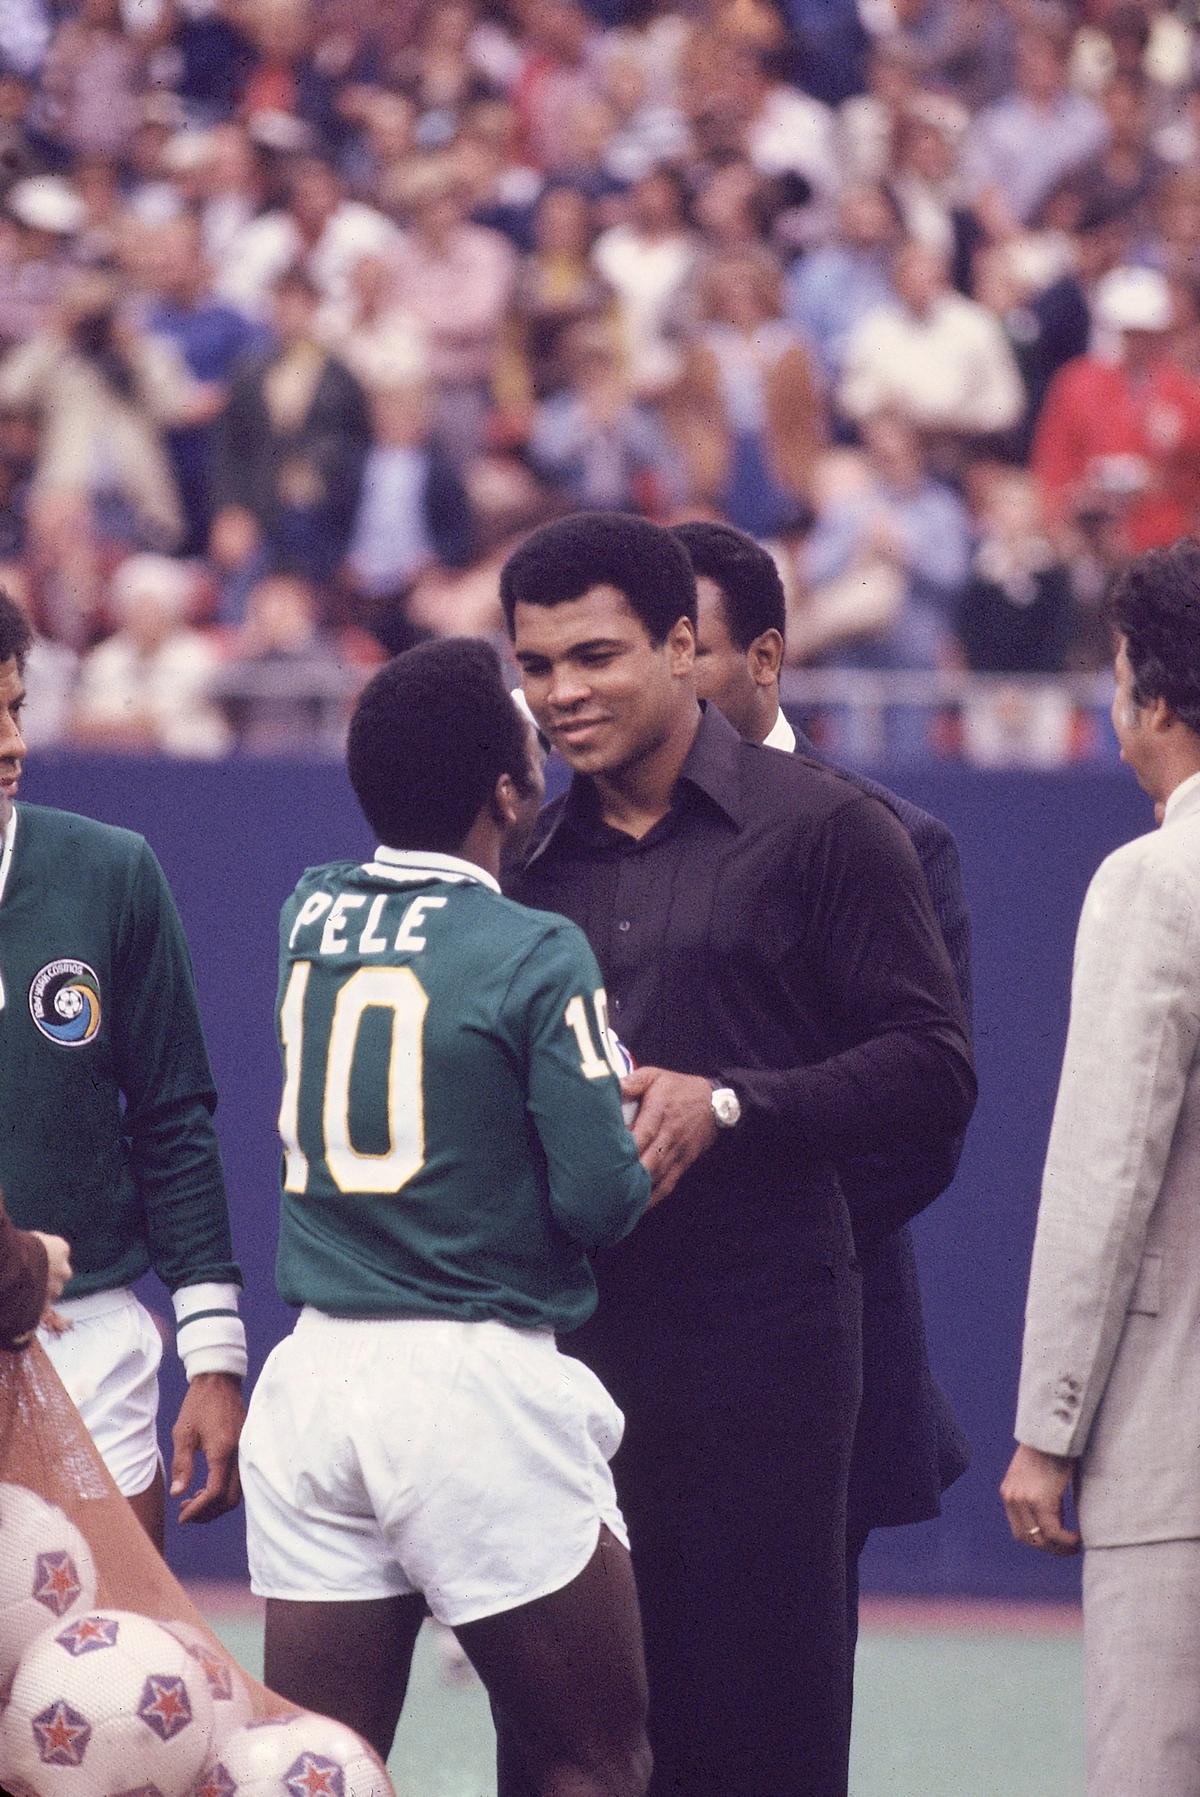 Pele (10) shakes hands with boxer Muhammad Ali before a match at Giants Stadium, New Jersey, USA, 1997. 